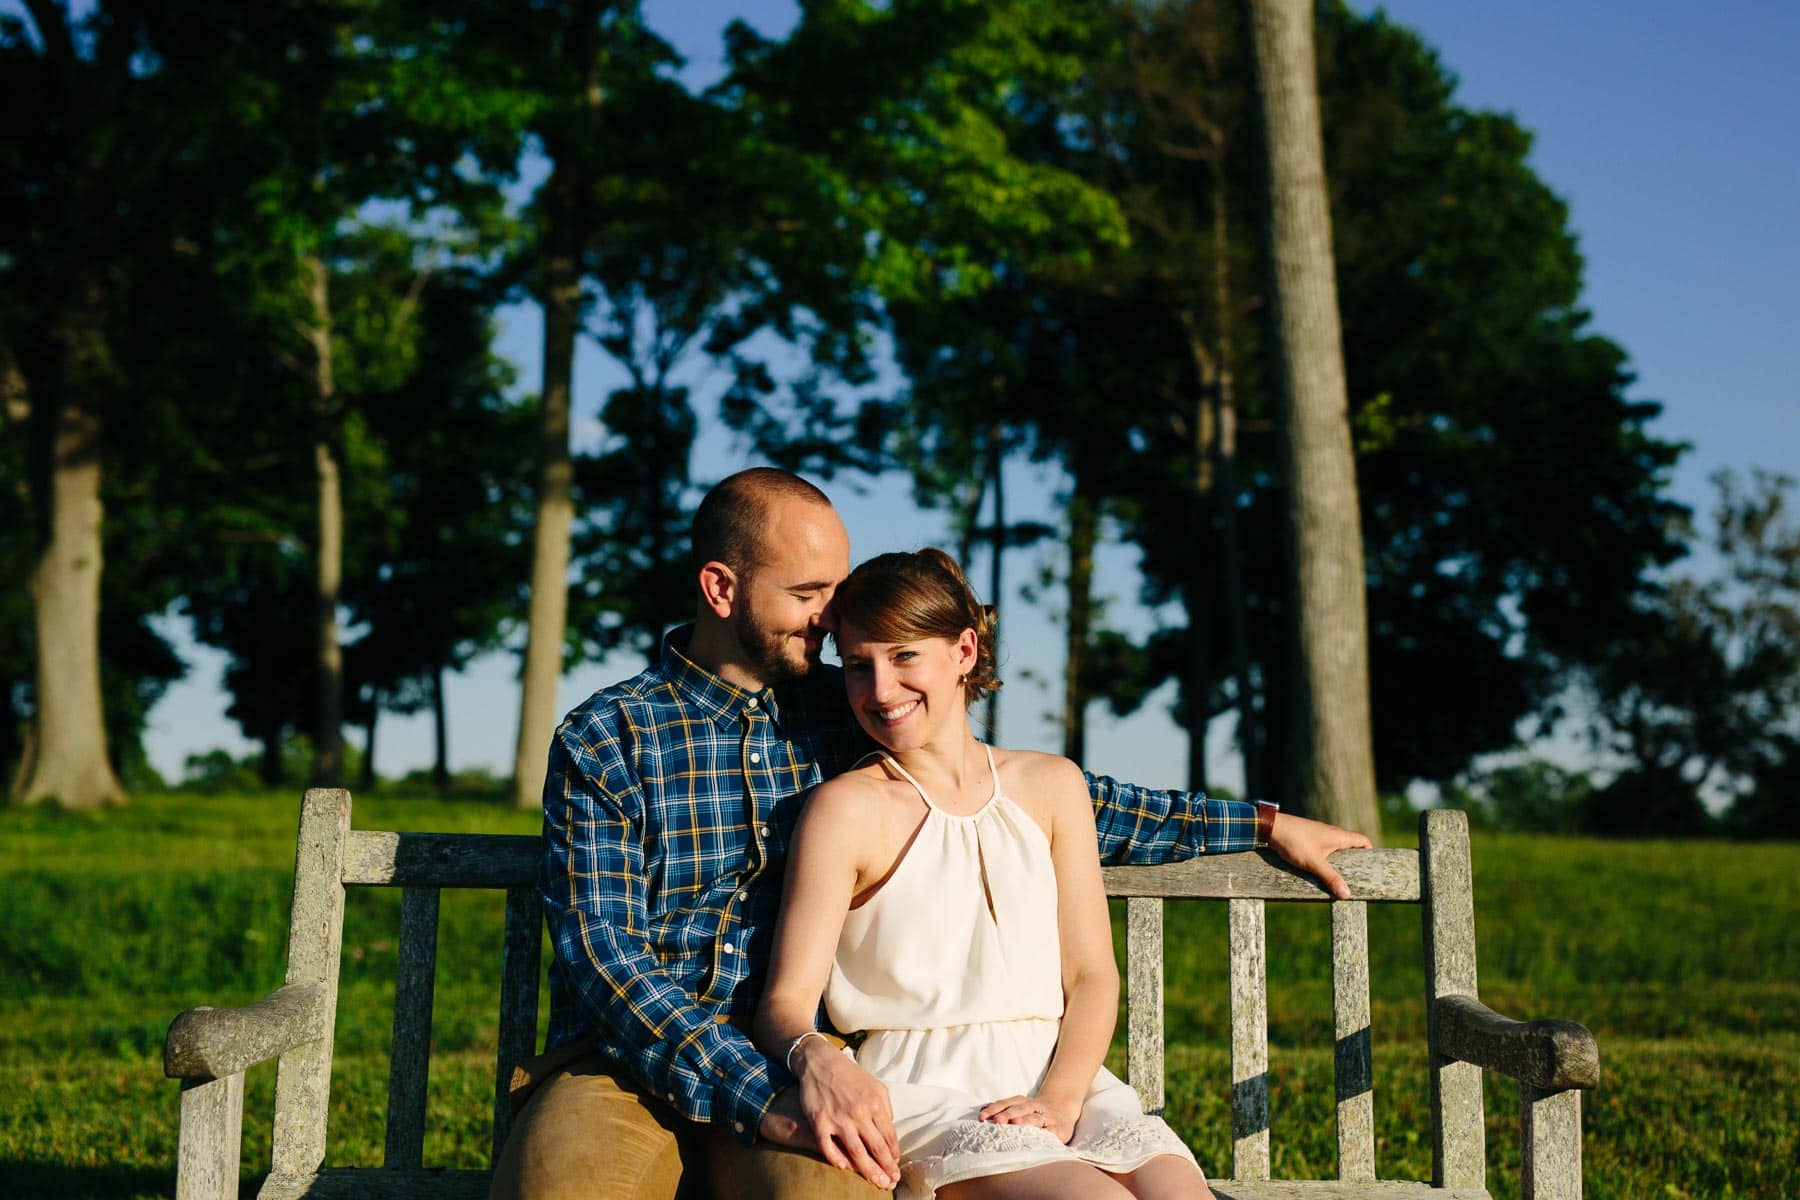 Kristen and Neds Worlds End engagement session. Photo by Kelly Benvenuto.